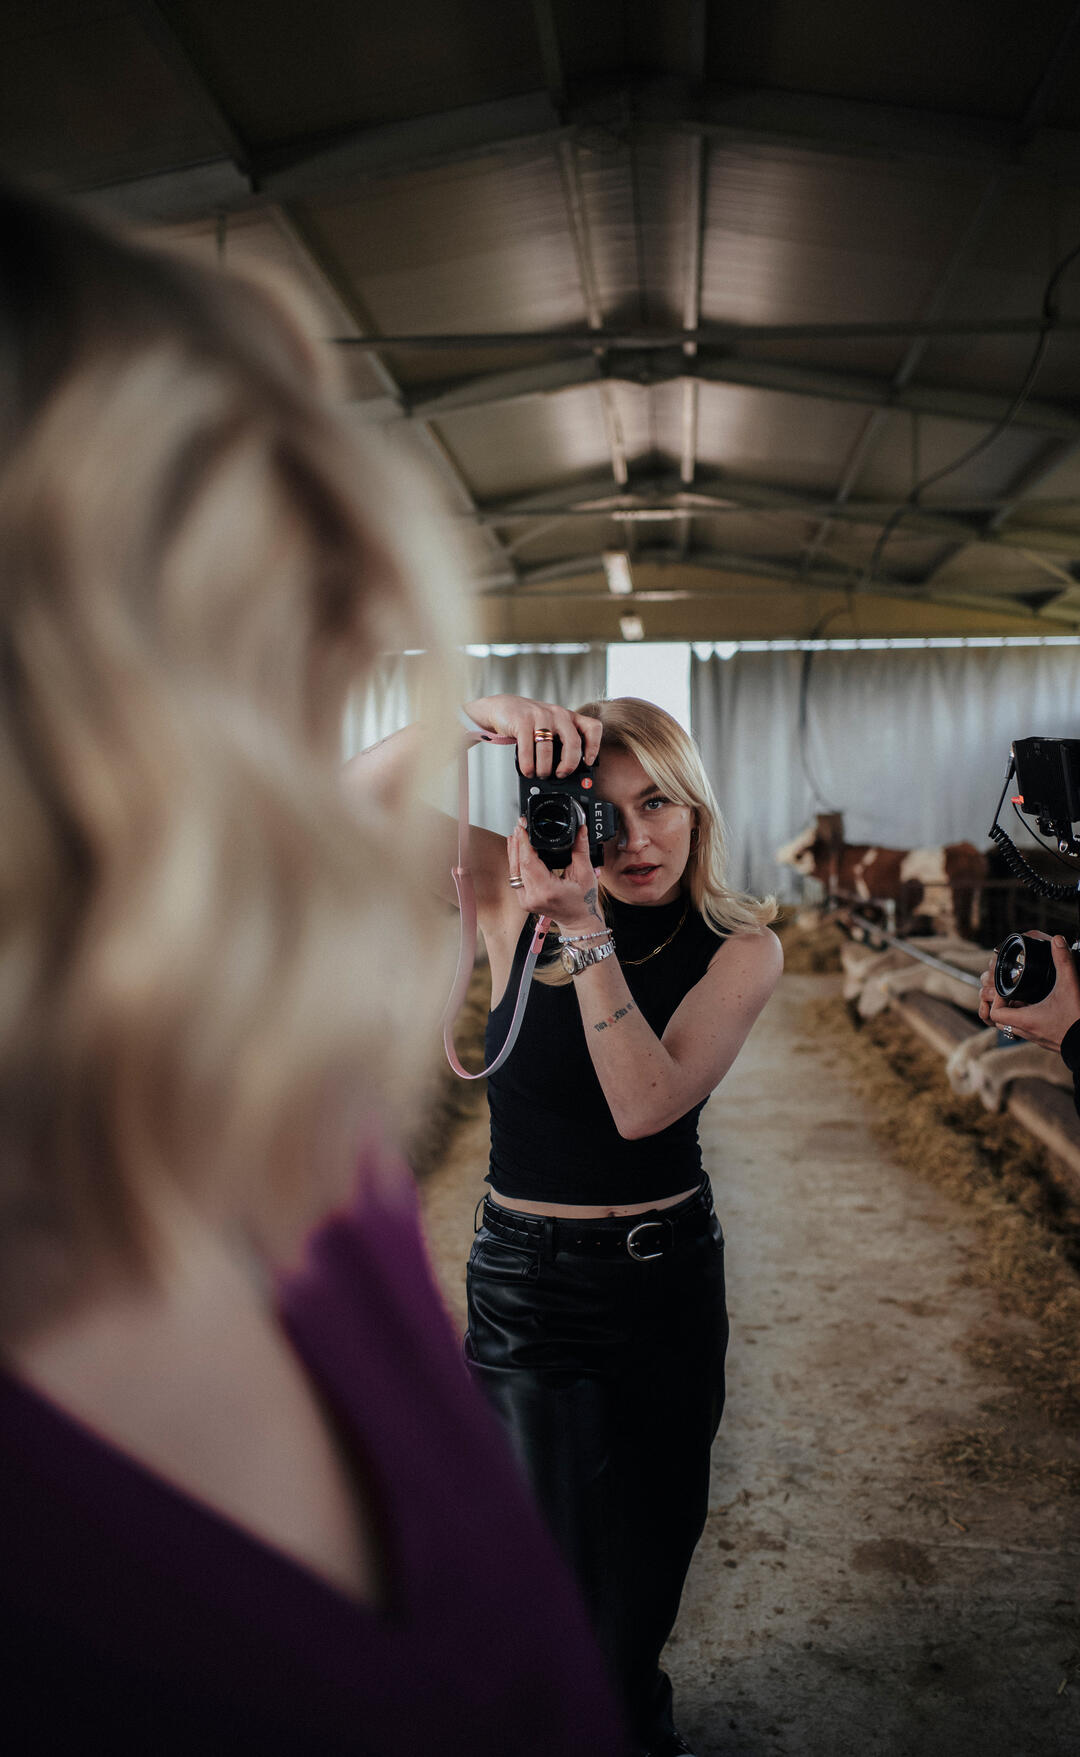 Woman photographs a model in the sheepfold